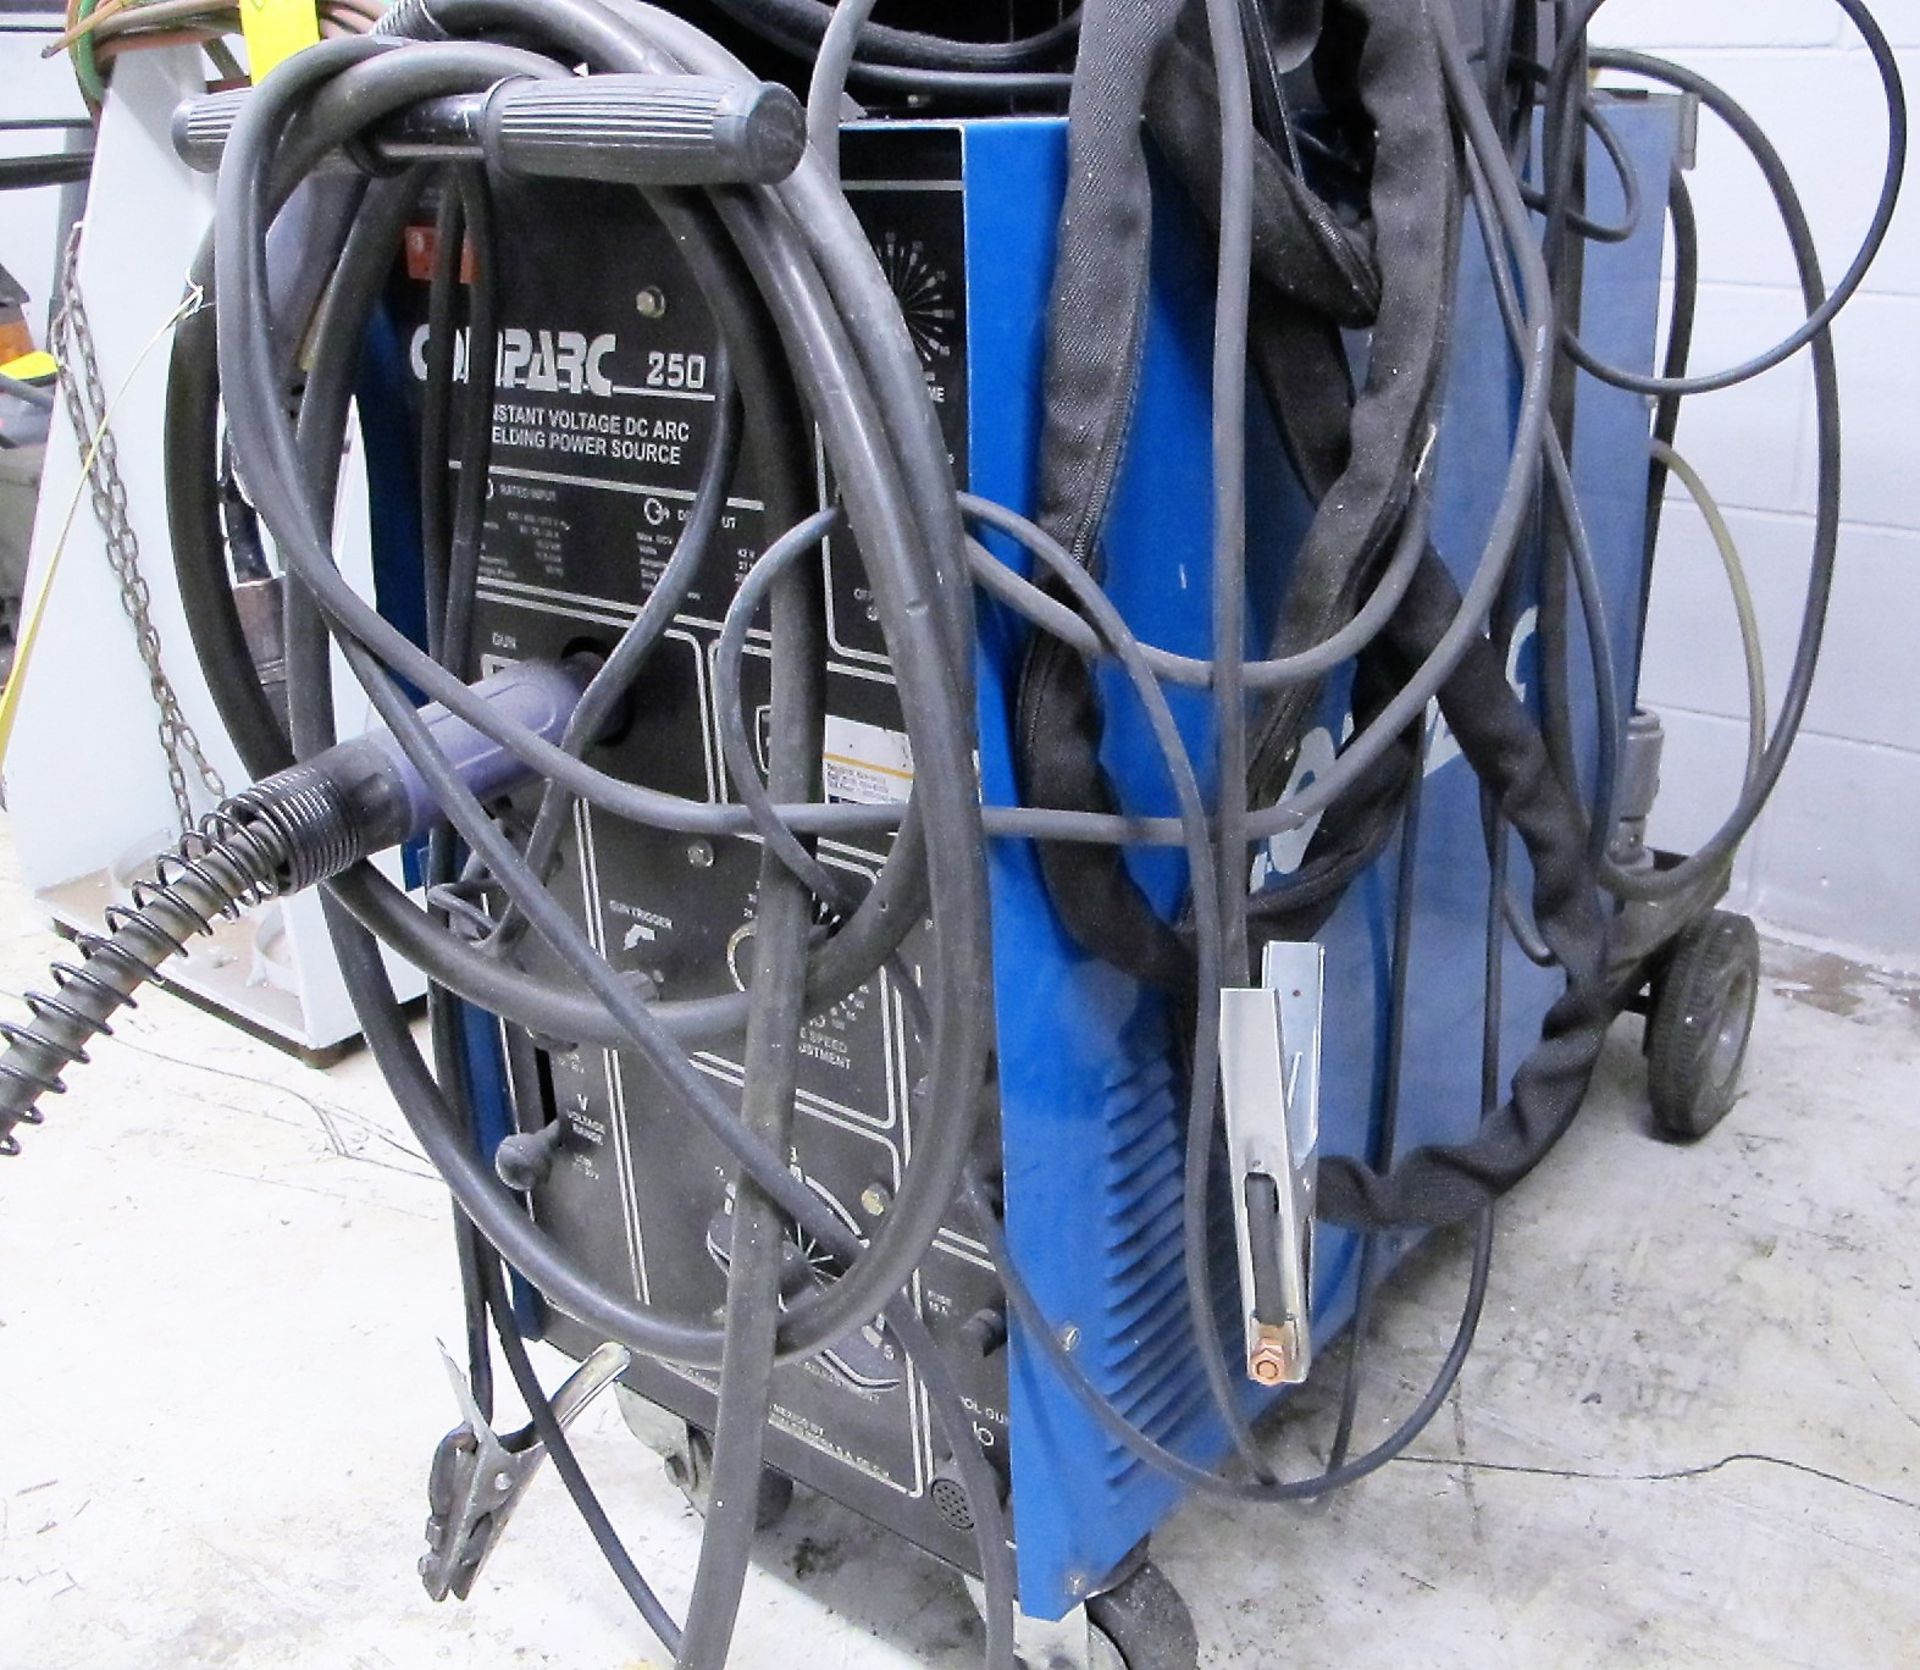 COMPARC 250 SP MIG WELDER W/CABLES, GUN AND CART